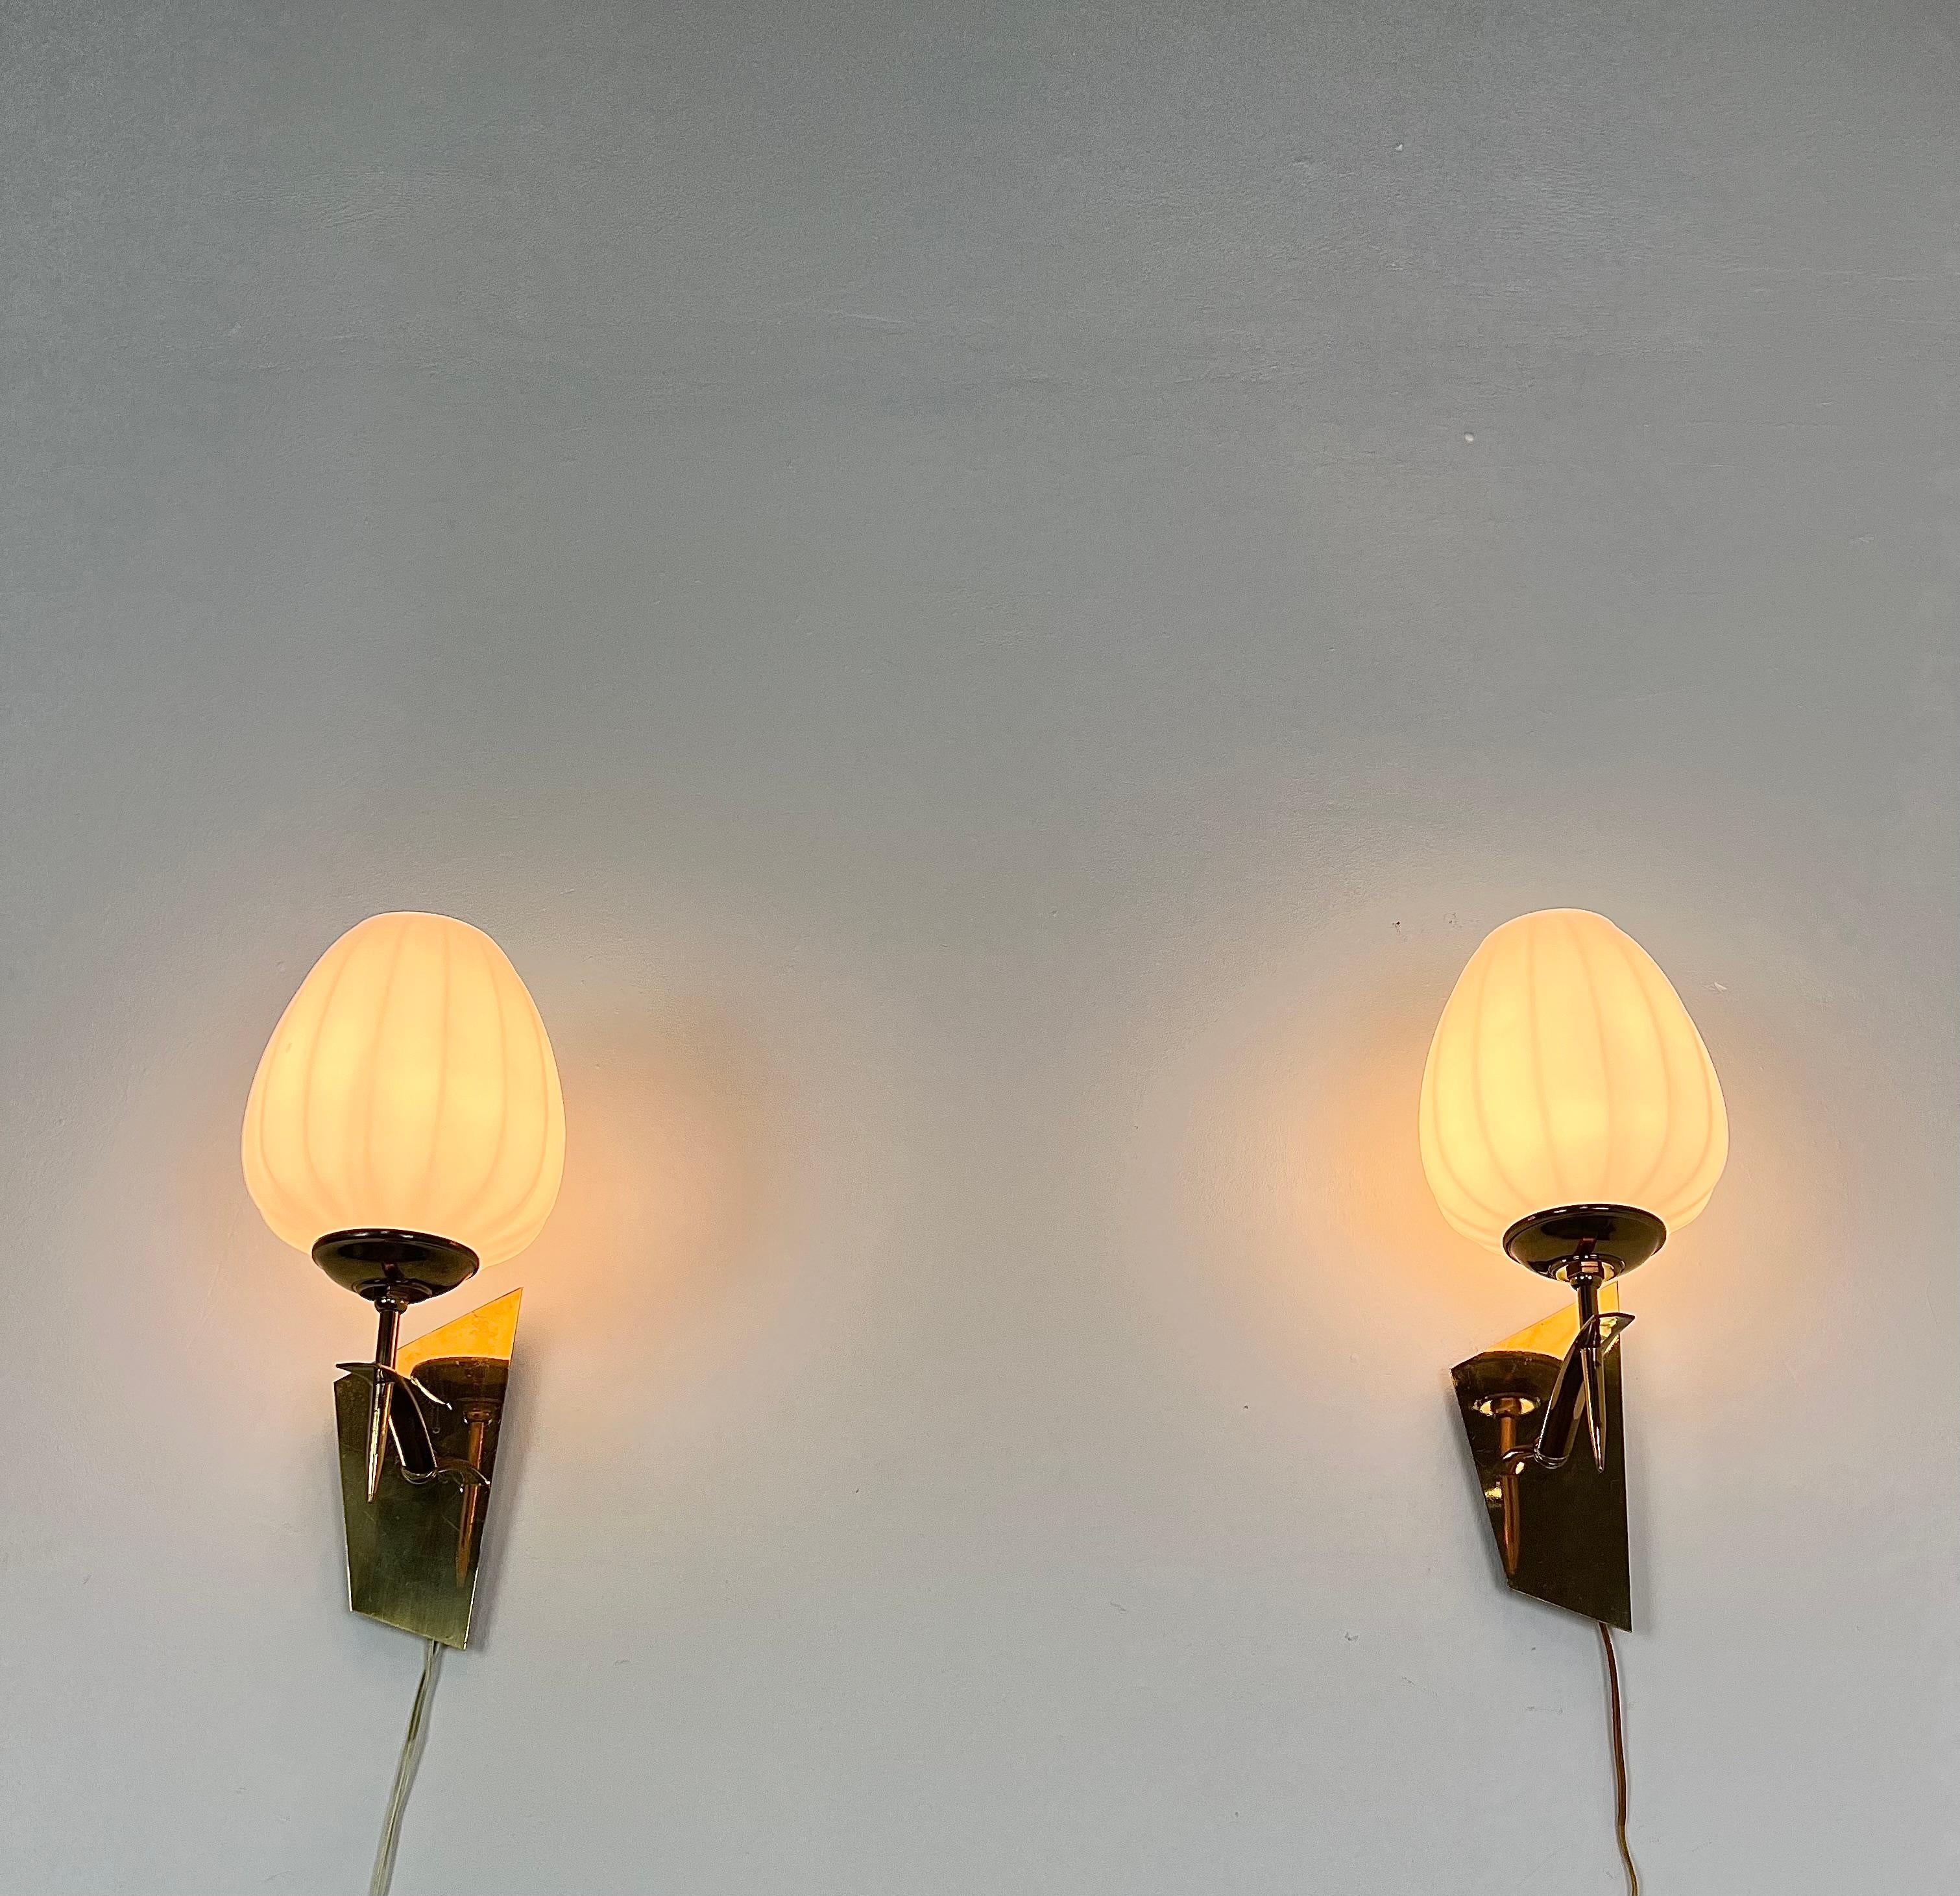 Set of 2 wall lamps made in Italy in the 1950s/60s and designed in the style of the renowned Stilnovo company. Each individual wall lamp was made with a brass structure with particular shapes that supports an opal glass diffuser.